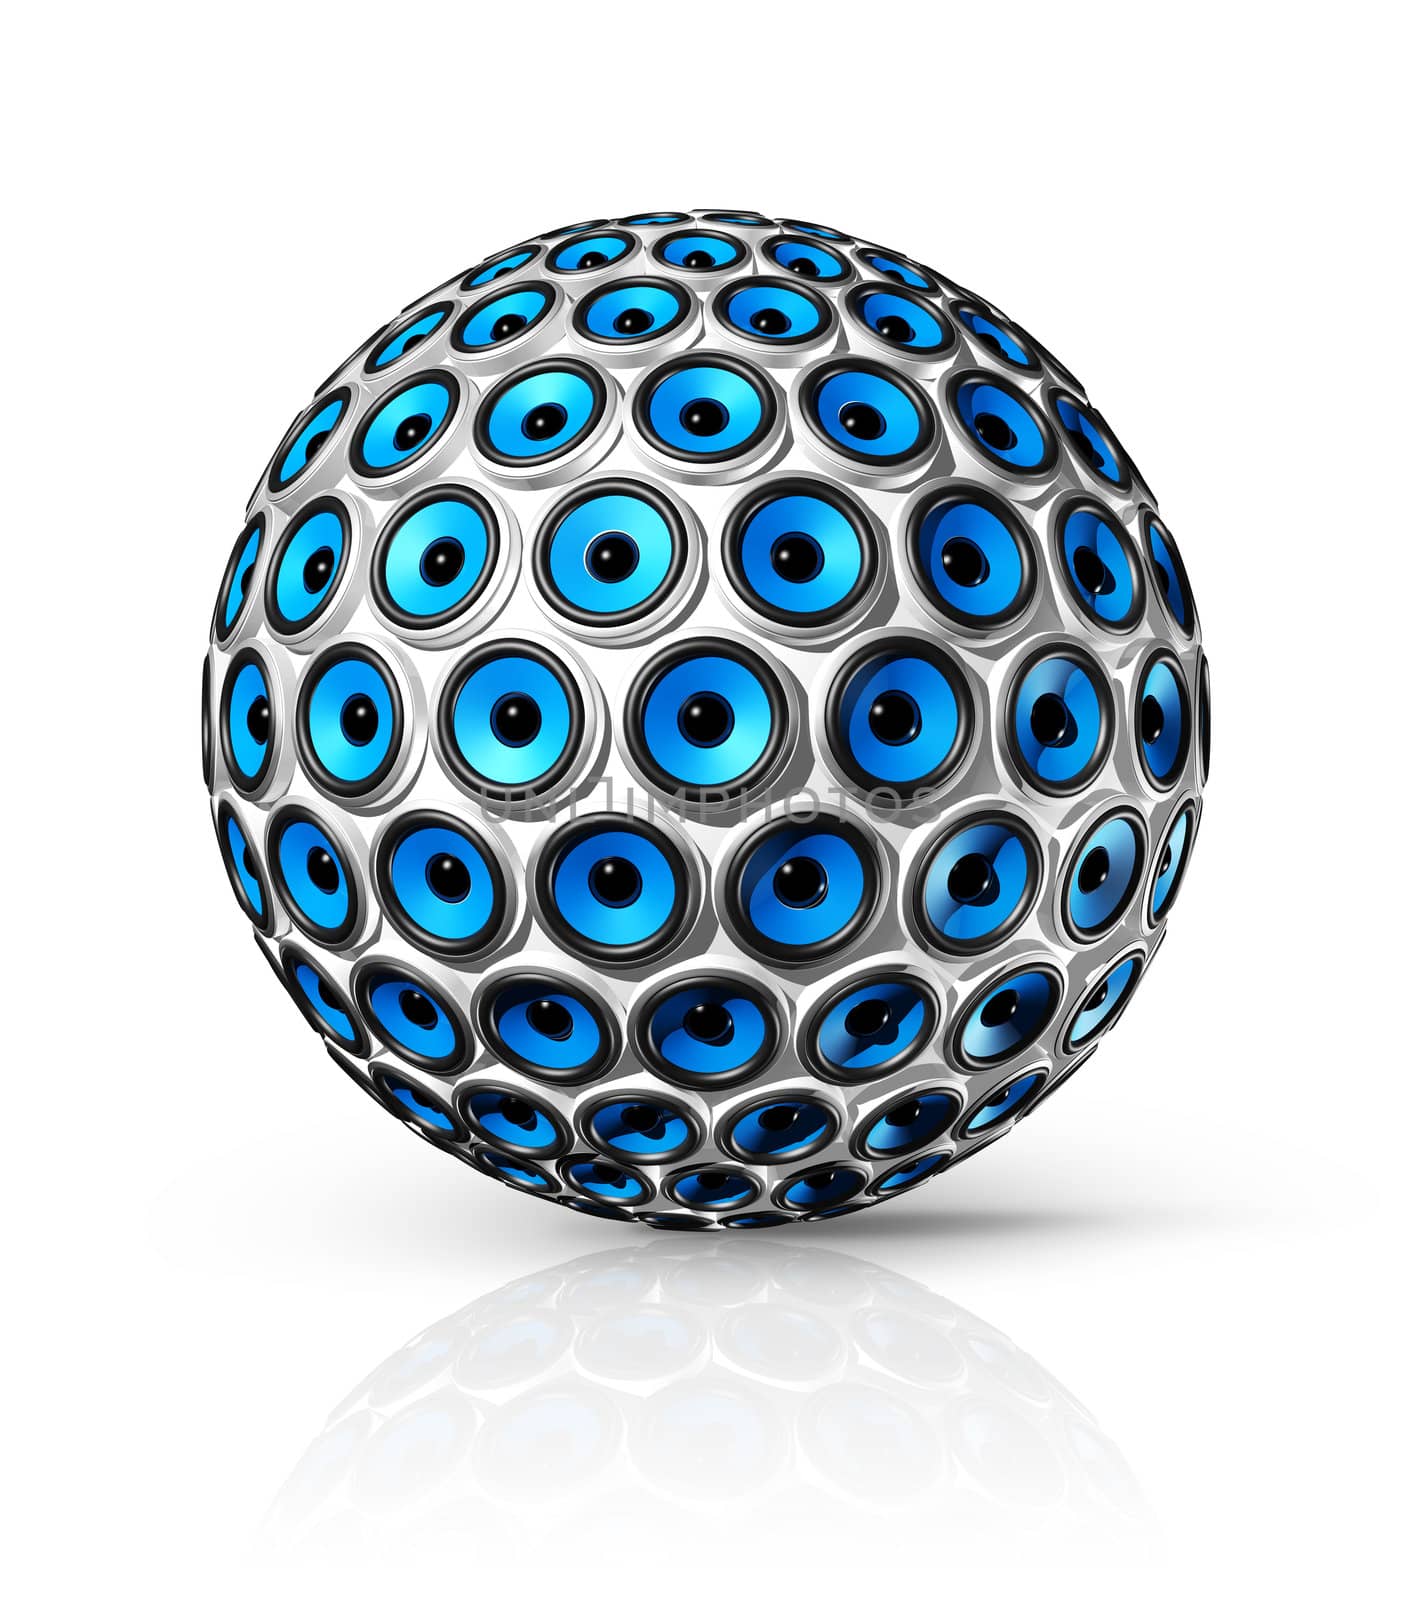 three dimensional blue speakers sphere isolated on white